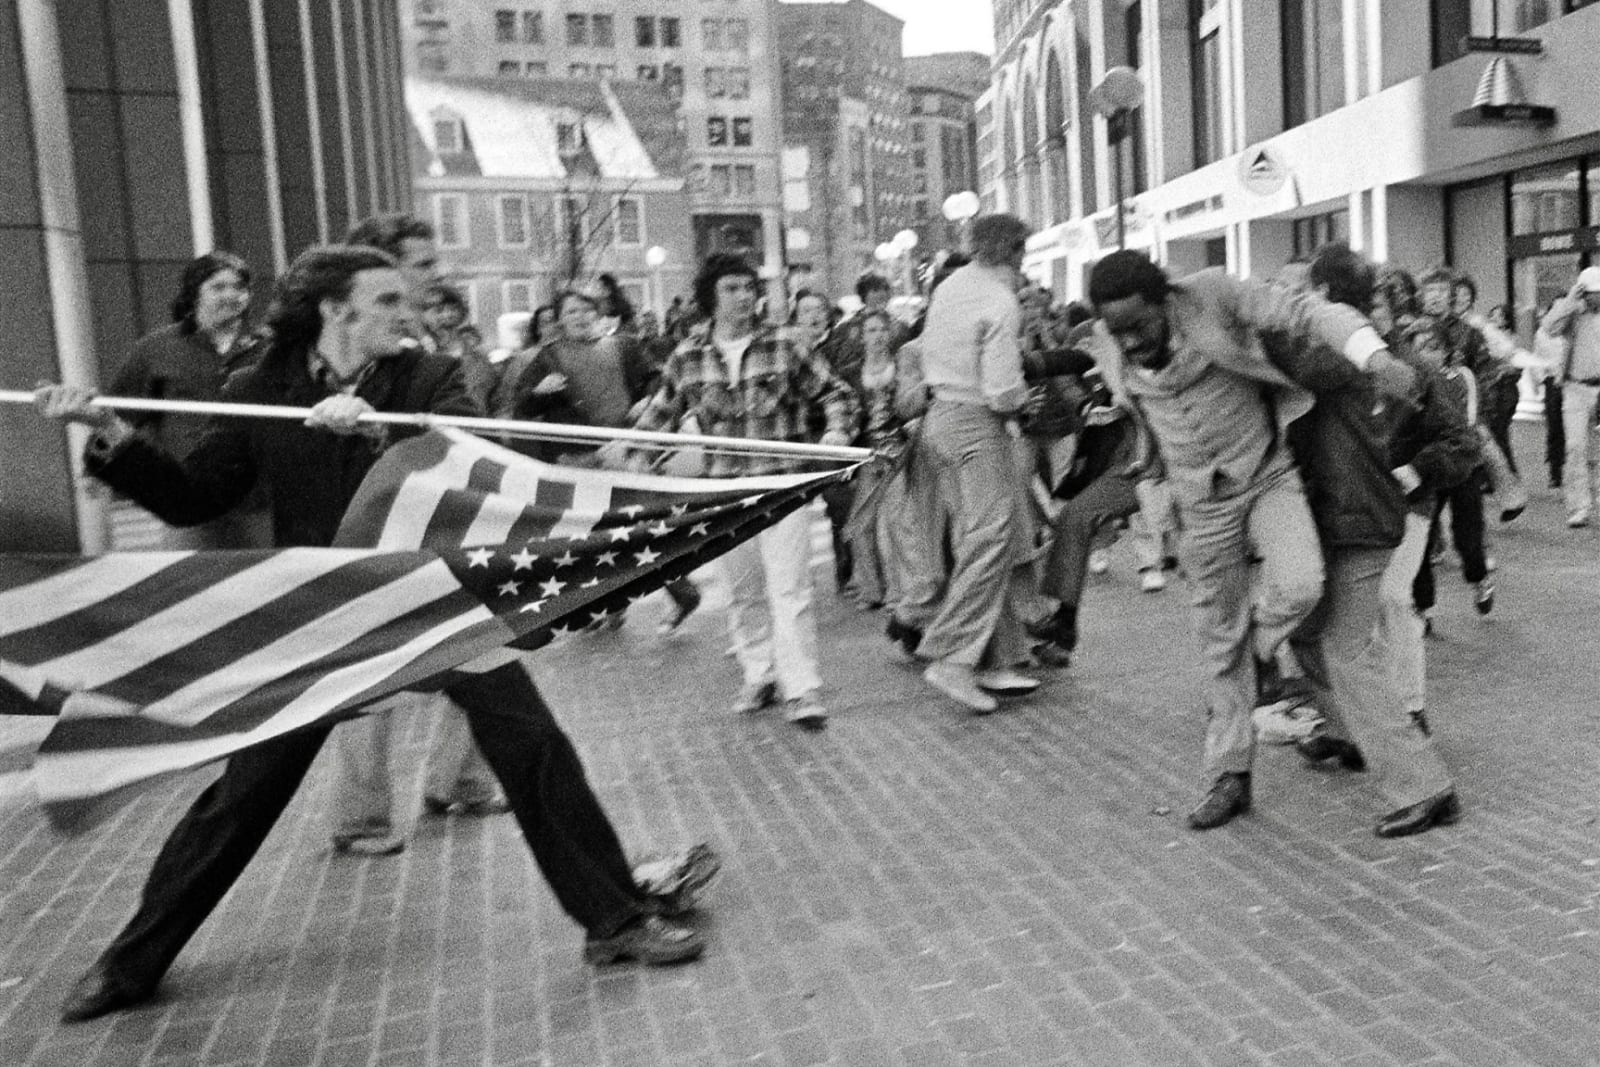 Stanley Forman, The Soiling of Old Glory; Desegregation Busing Protests (Joseph Rakes and Ted Landsmark), Boston, MA, April 5, 1976